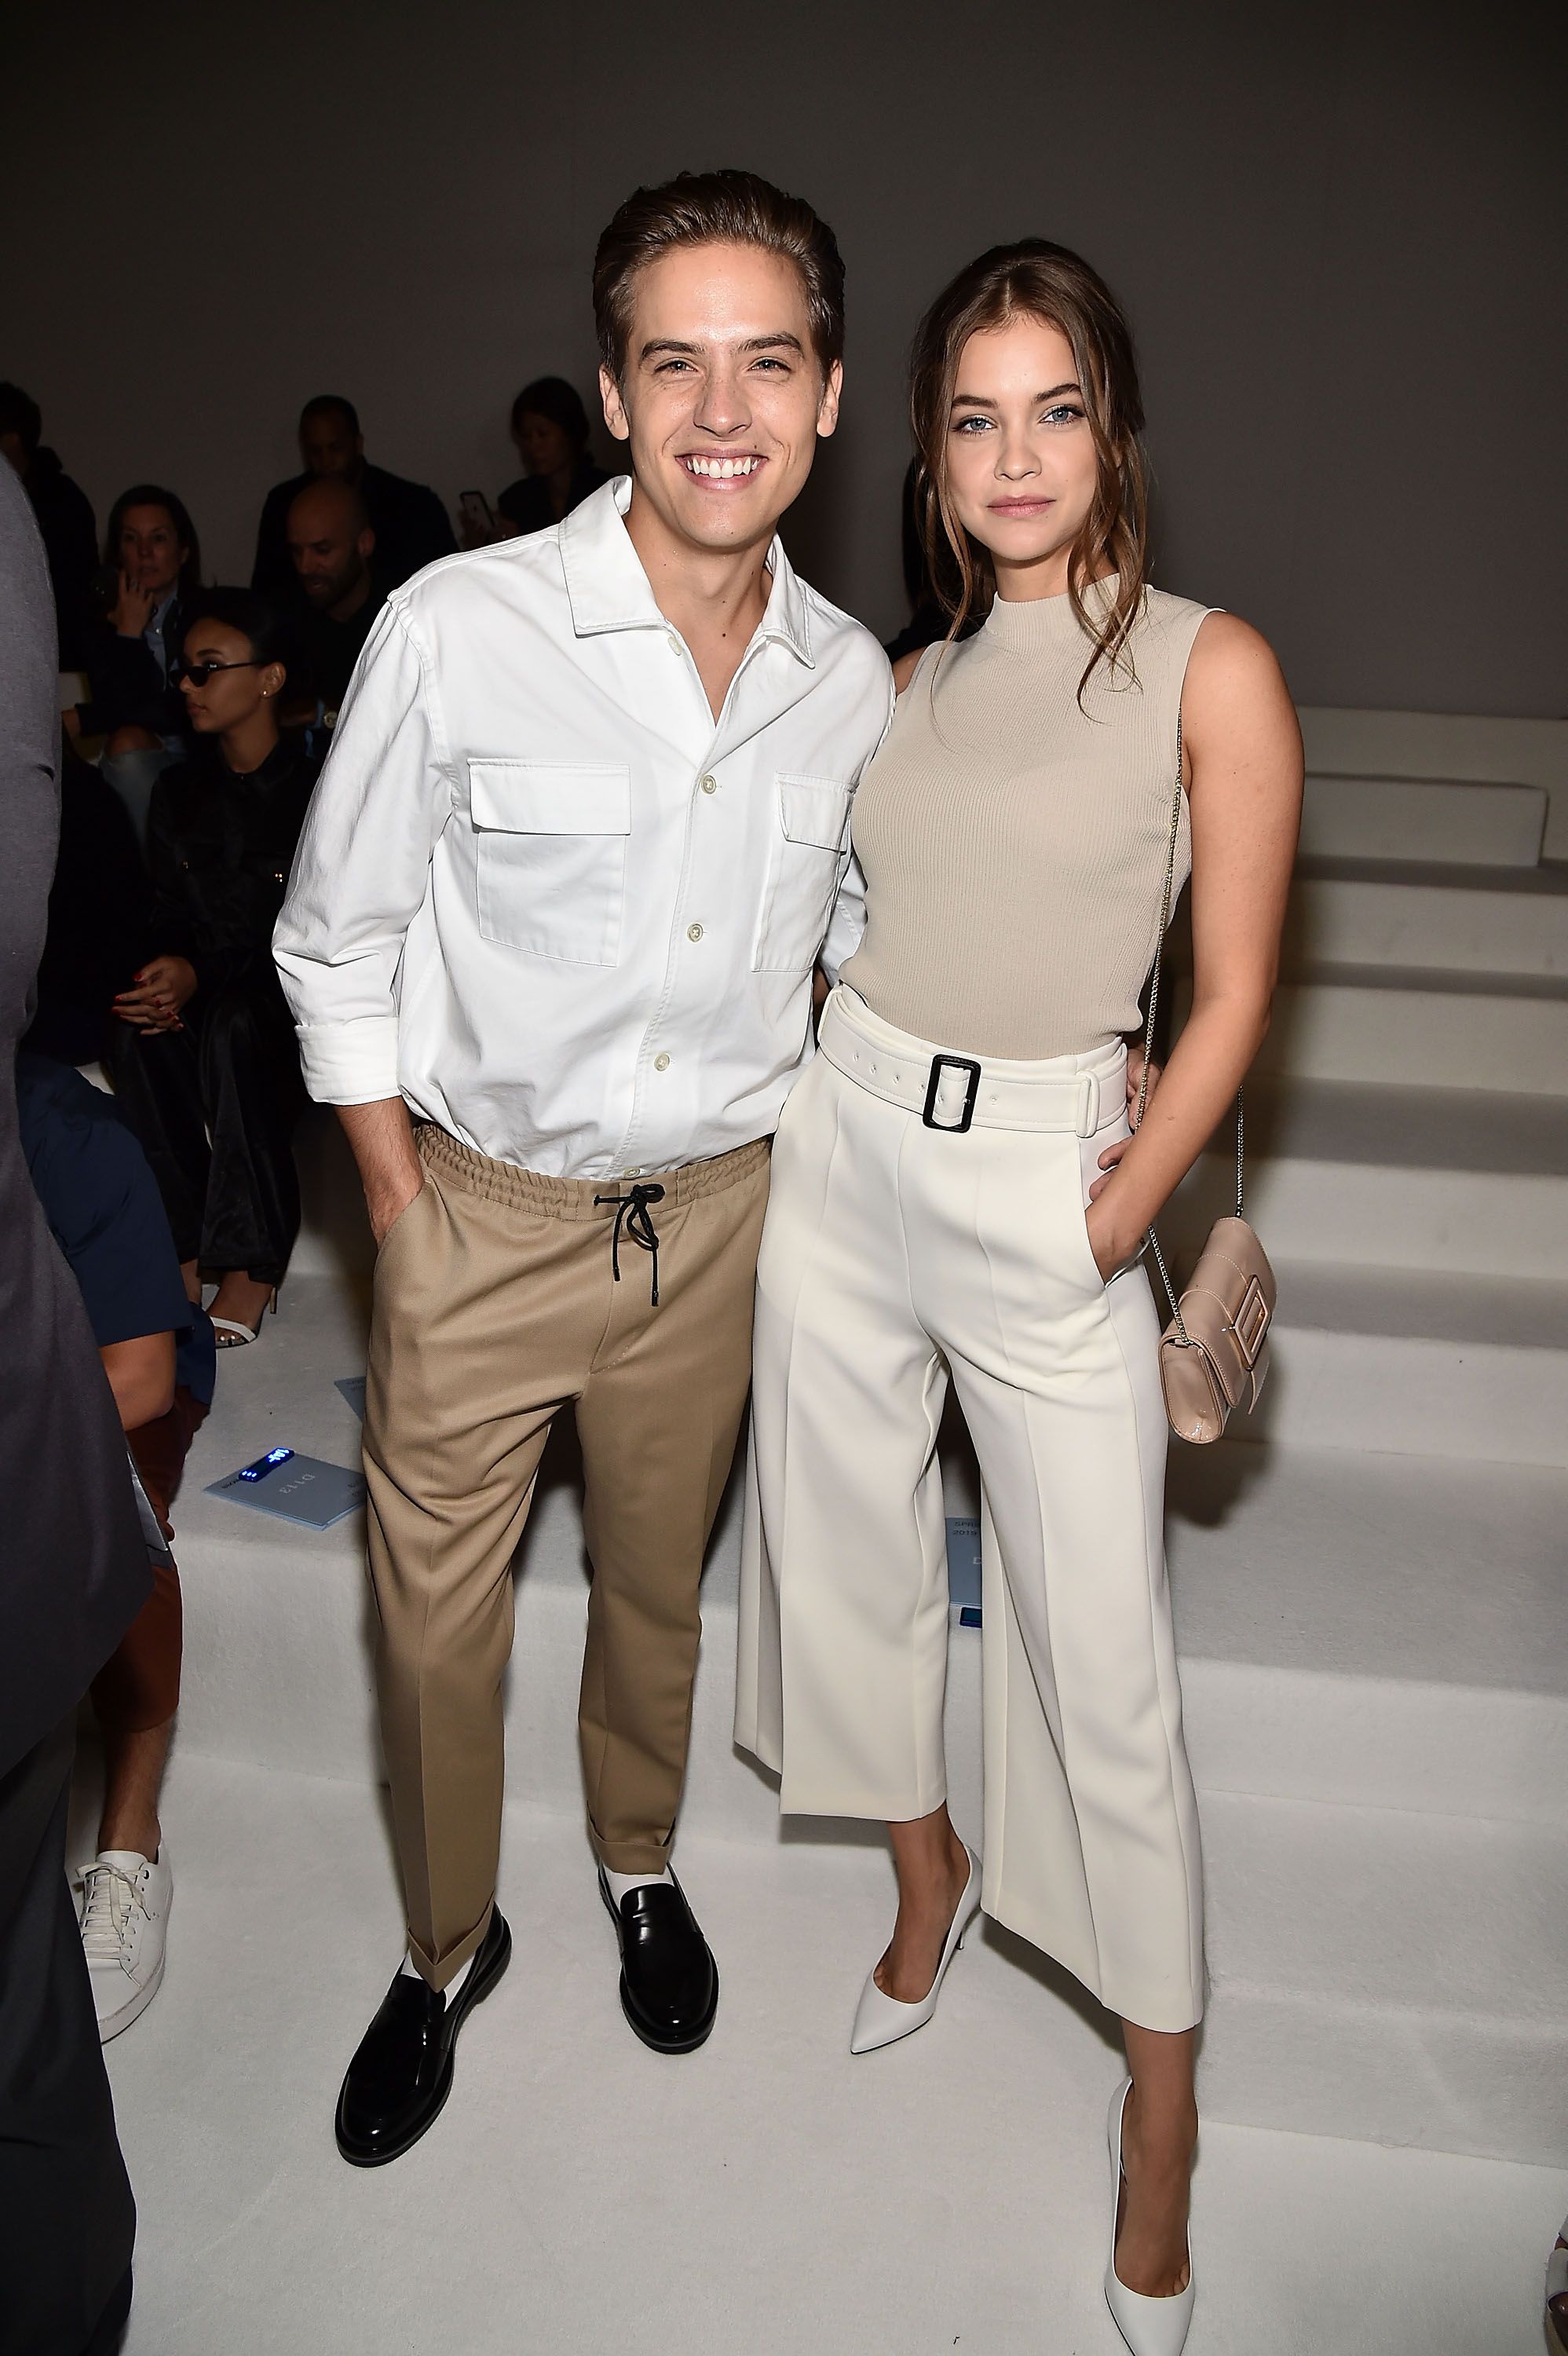 dylan-sprouse-and-barbara-palvin-attend-boss-womenswear-news-photo-1030119388-1549636816.jpg